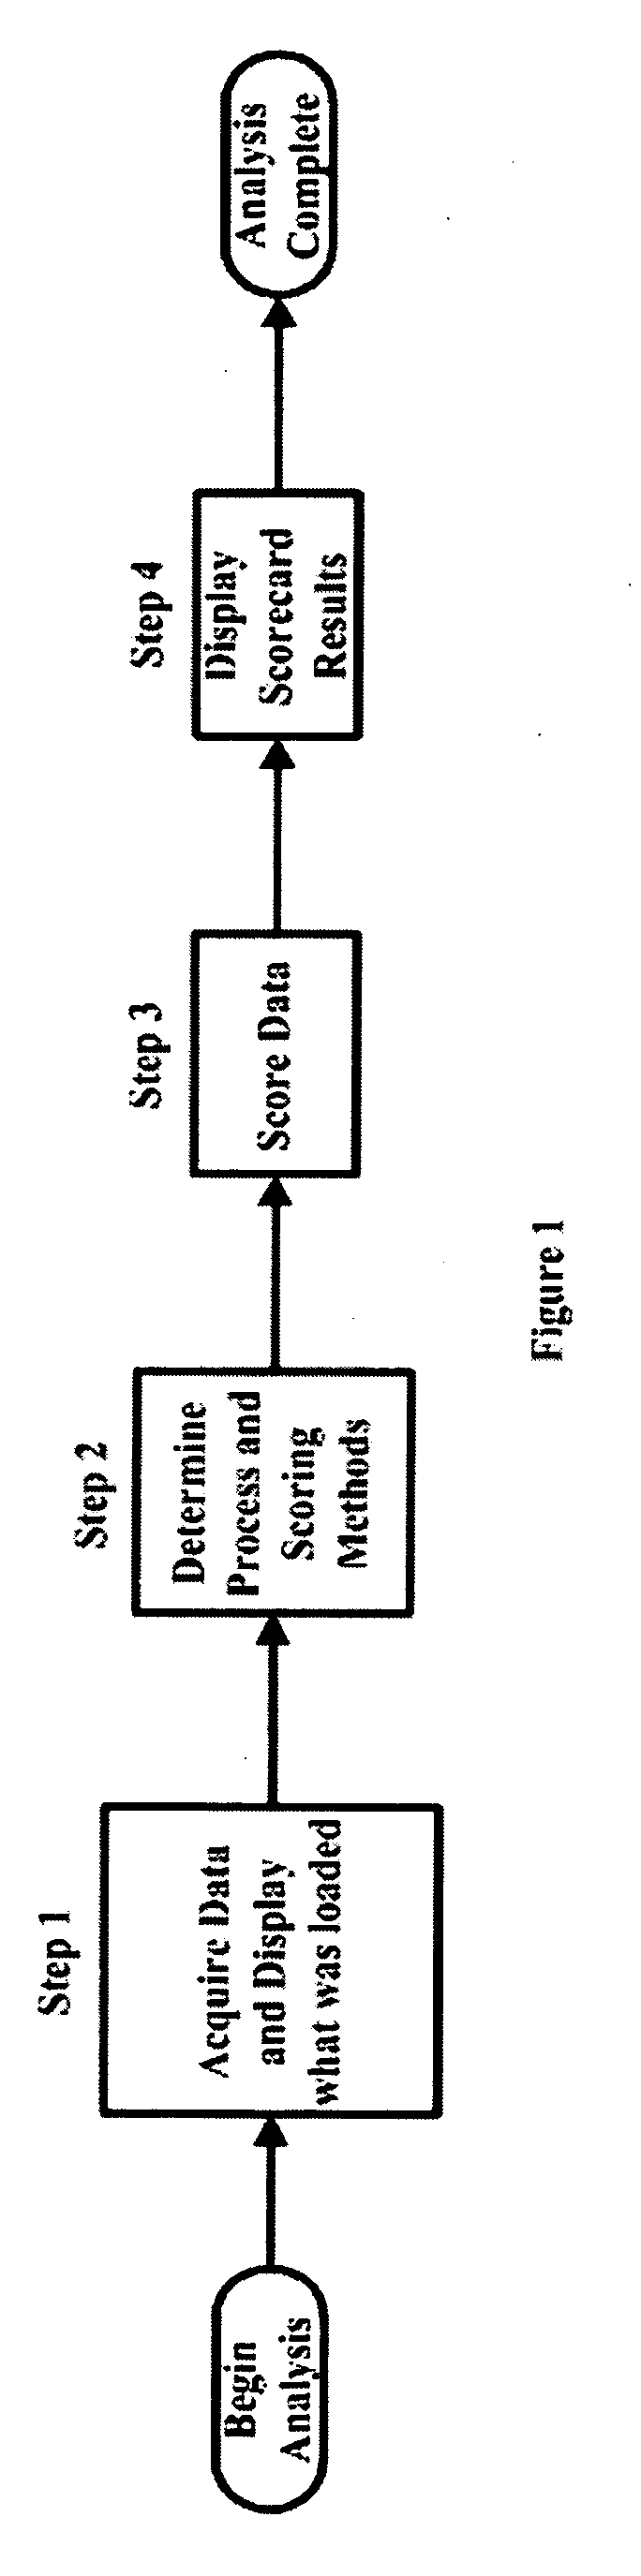 Method for capturing and analyzing test result data